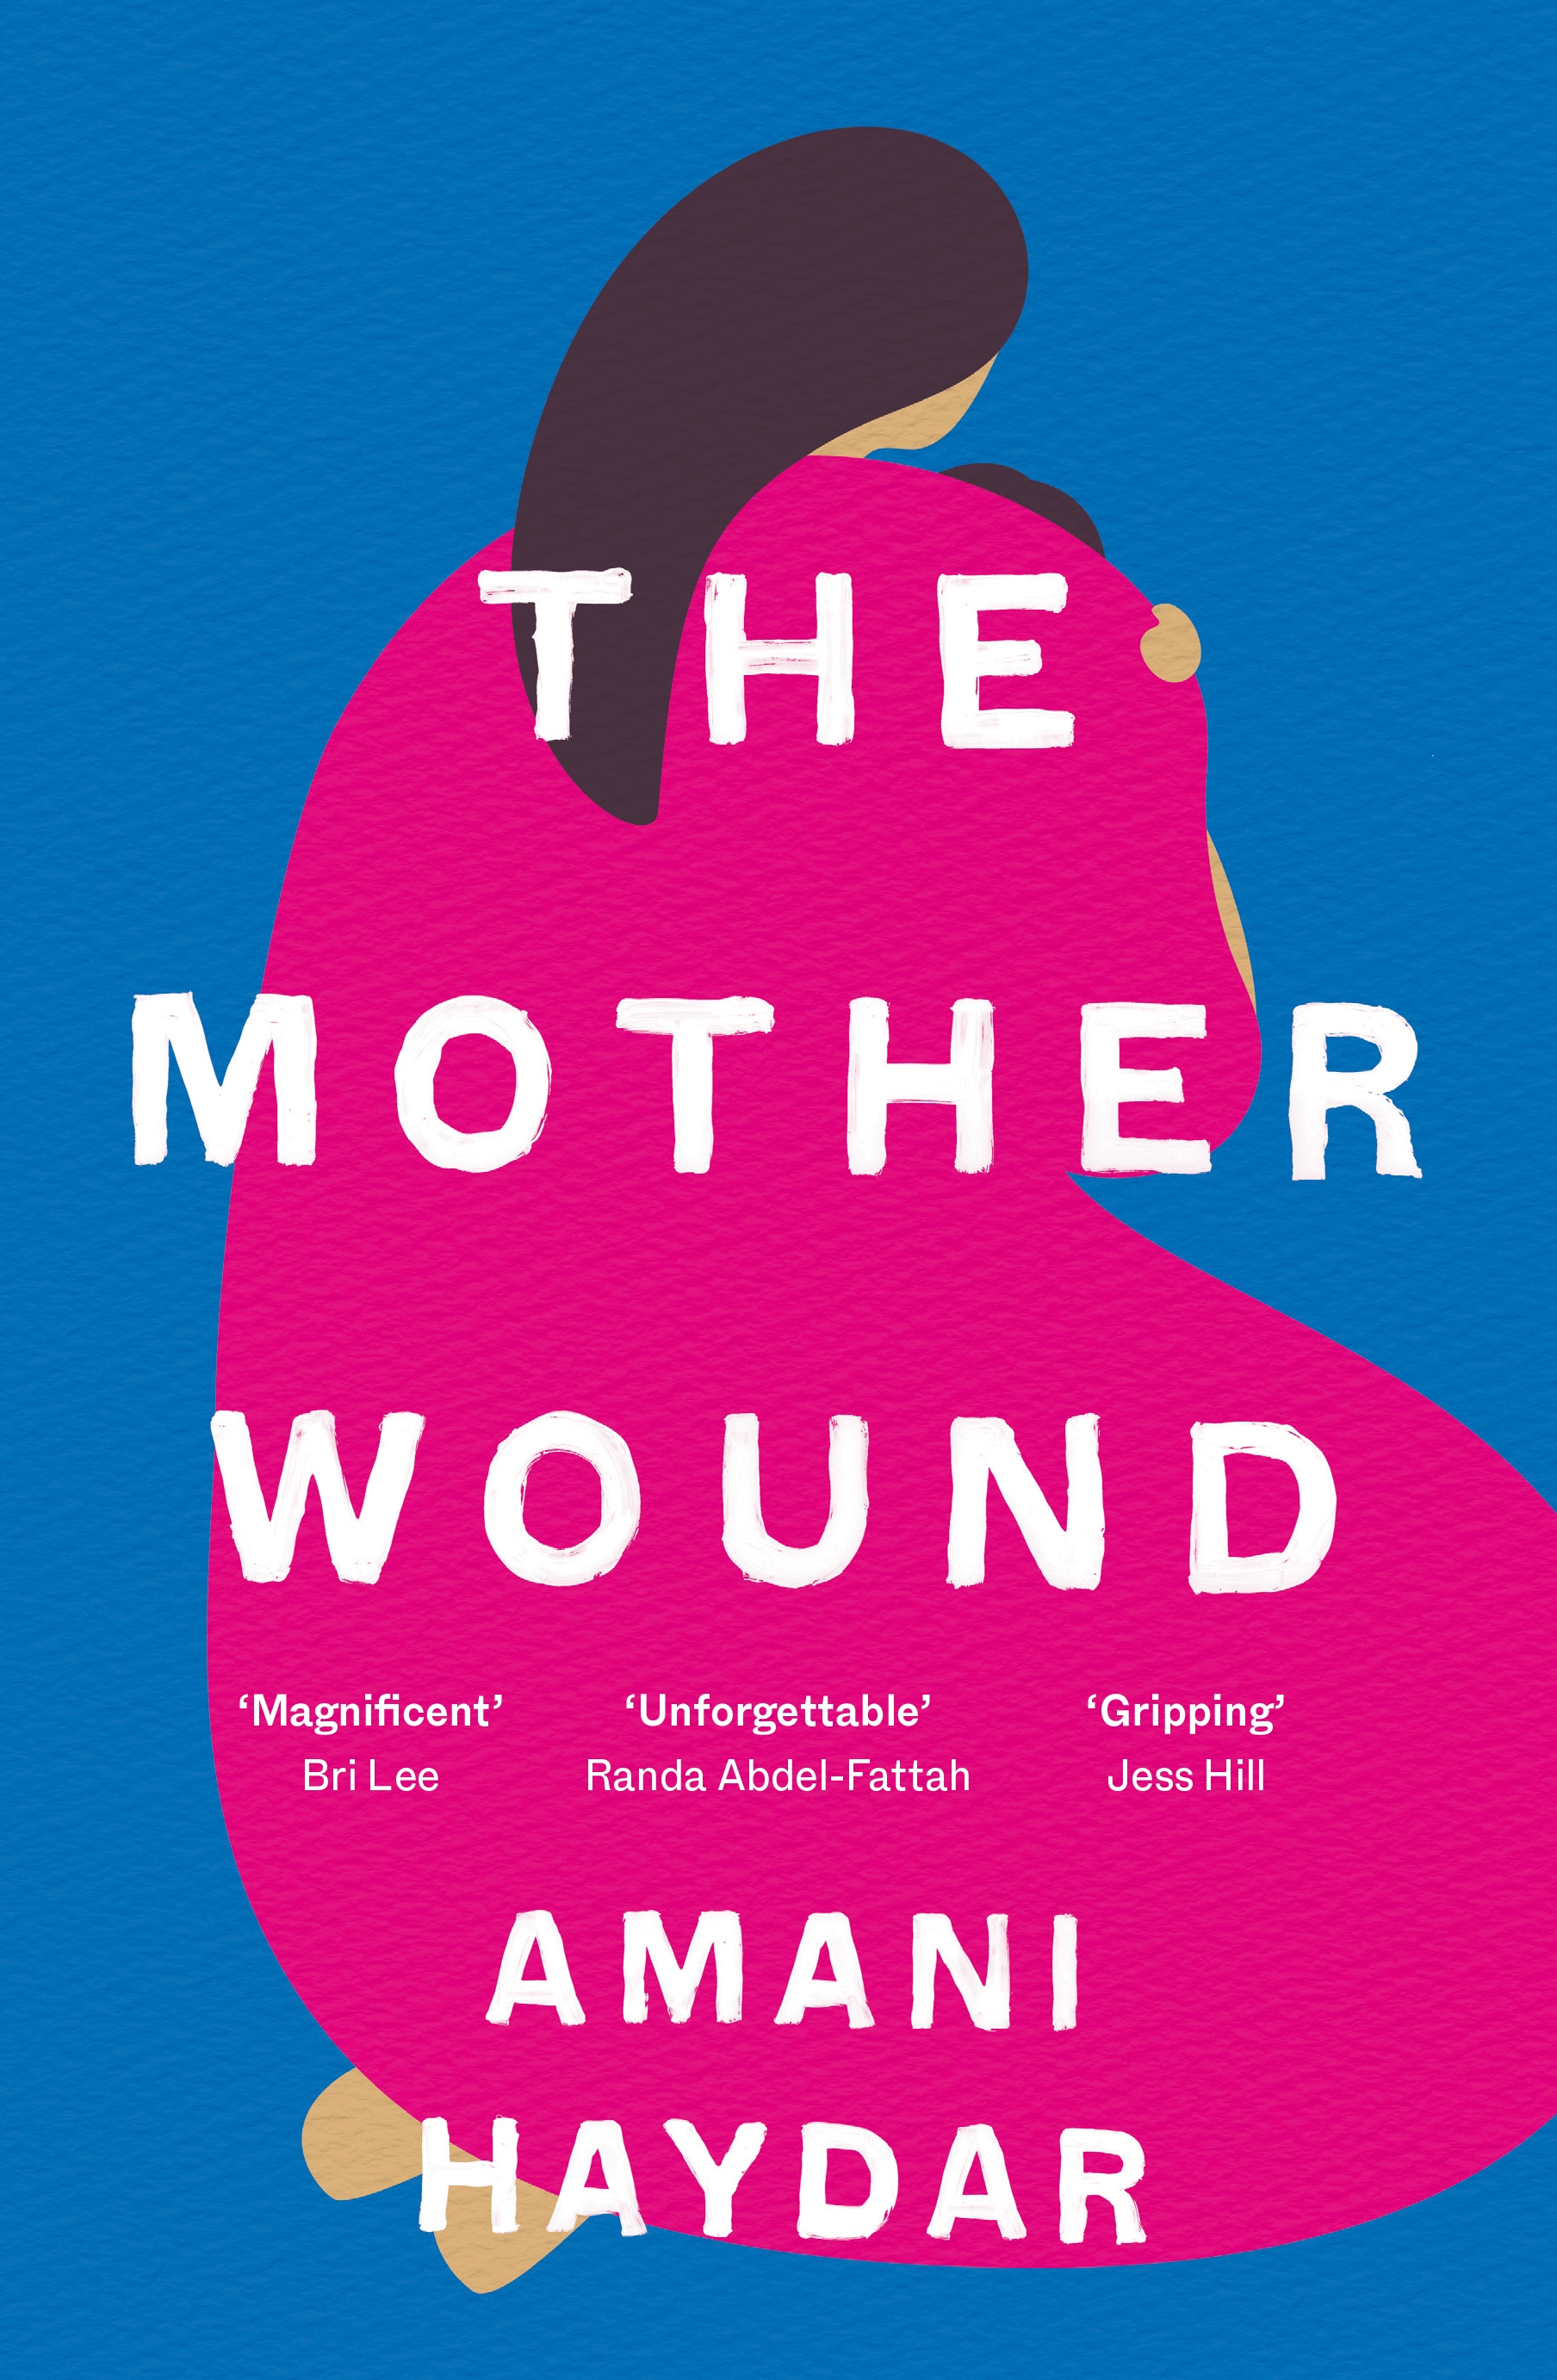 The front cover of Amani Haydar's memoir, The Mother Wound